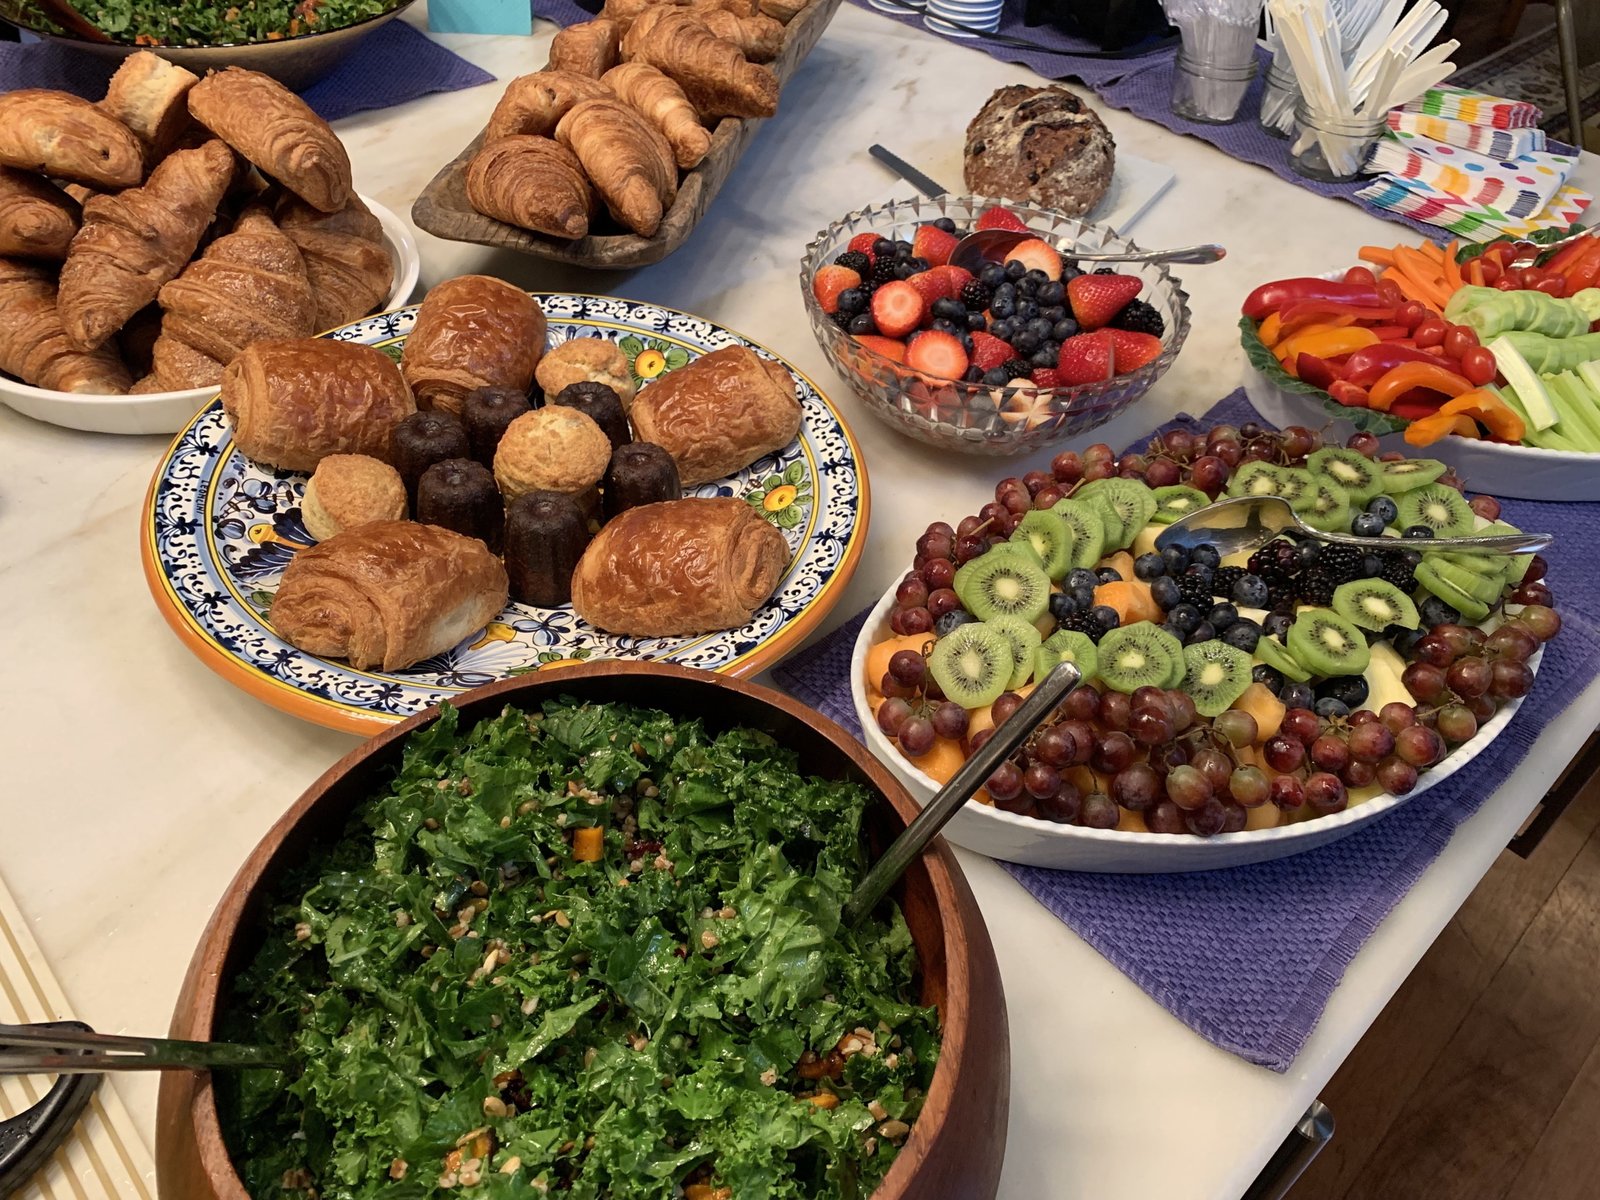 Kale salad with Pepitas and roasted butternut squash, fresh fruit and pastries